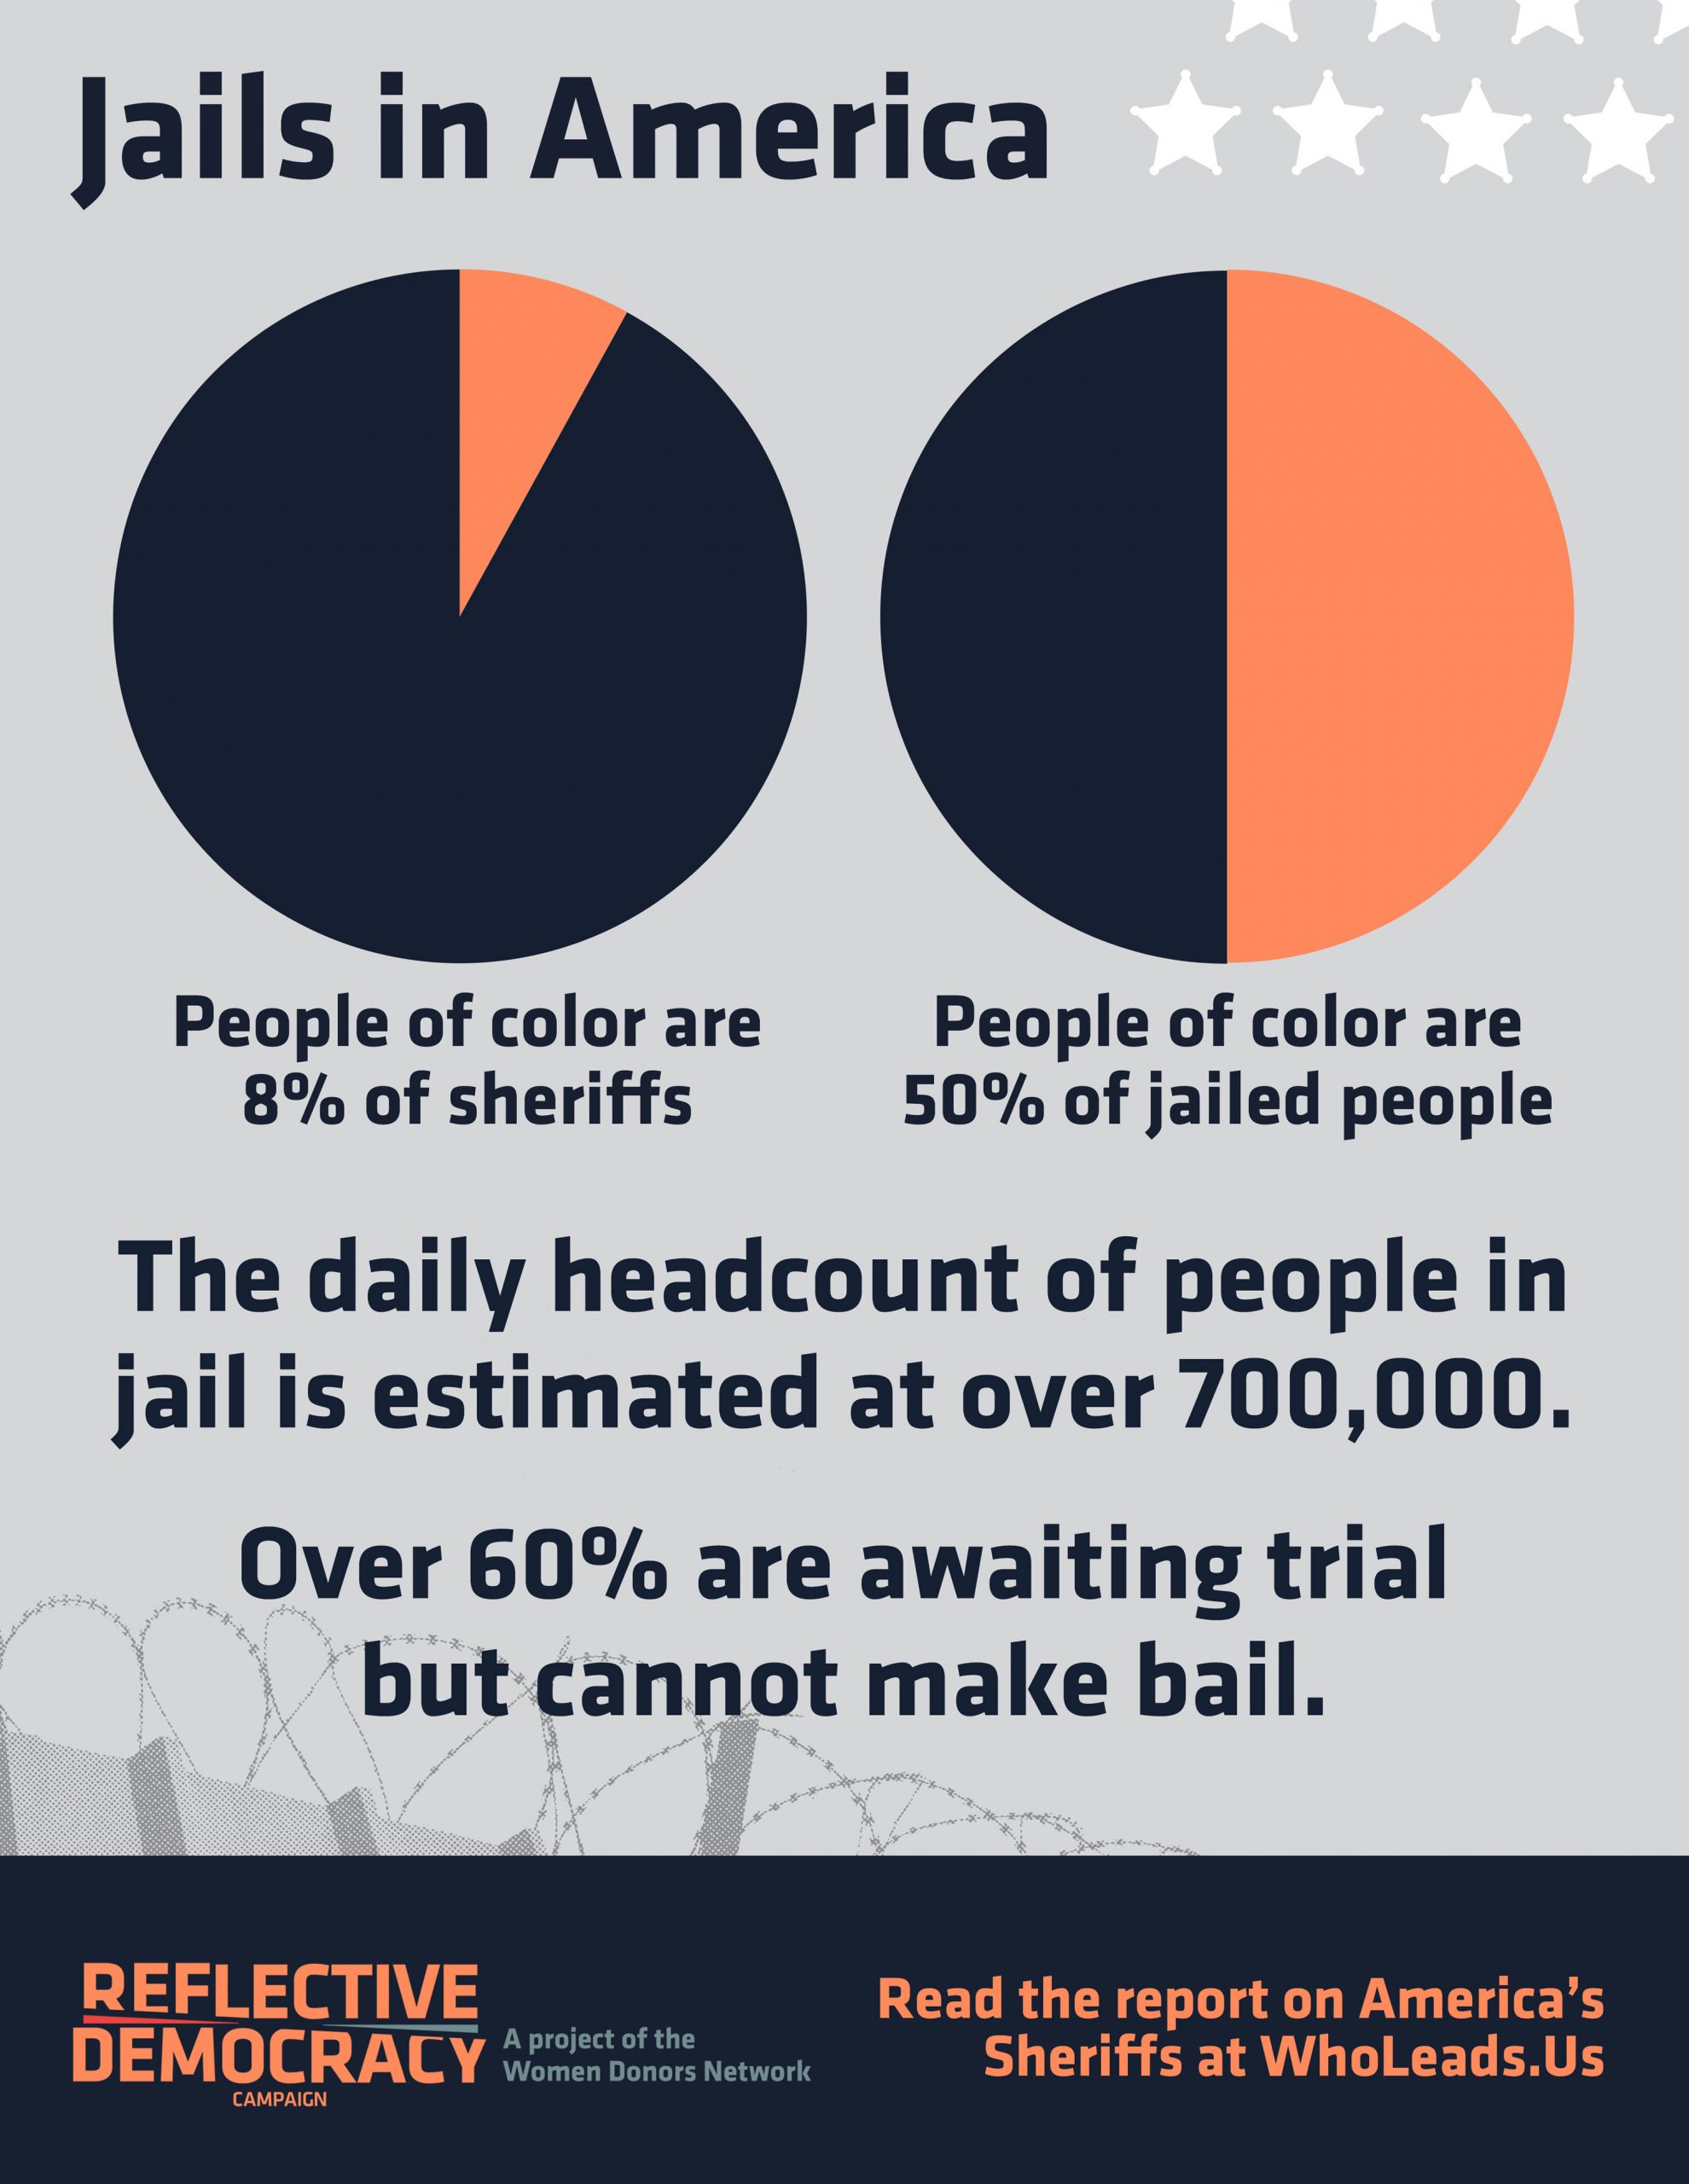 Graphs showing people of color are 8% of sherrifs, yet 50% of jailed people